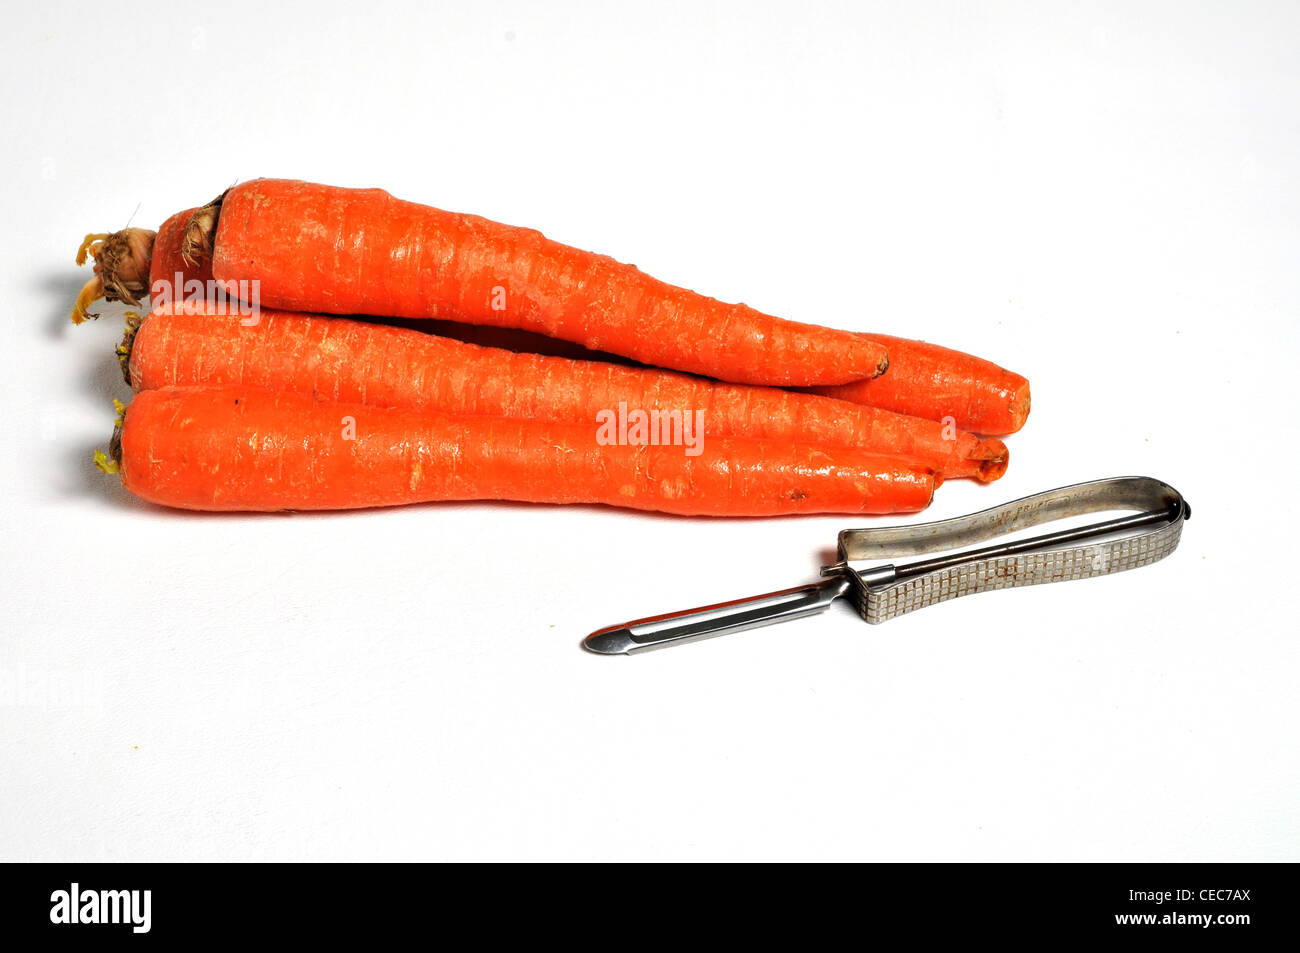 Carrots and a potato peeler are laying on a plain white background. Stock Photo